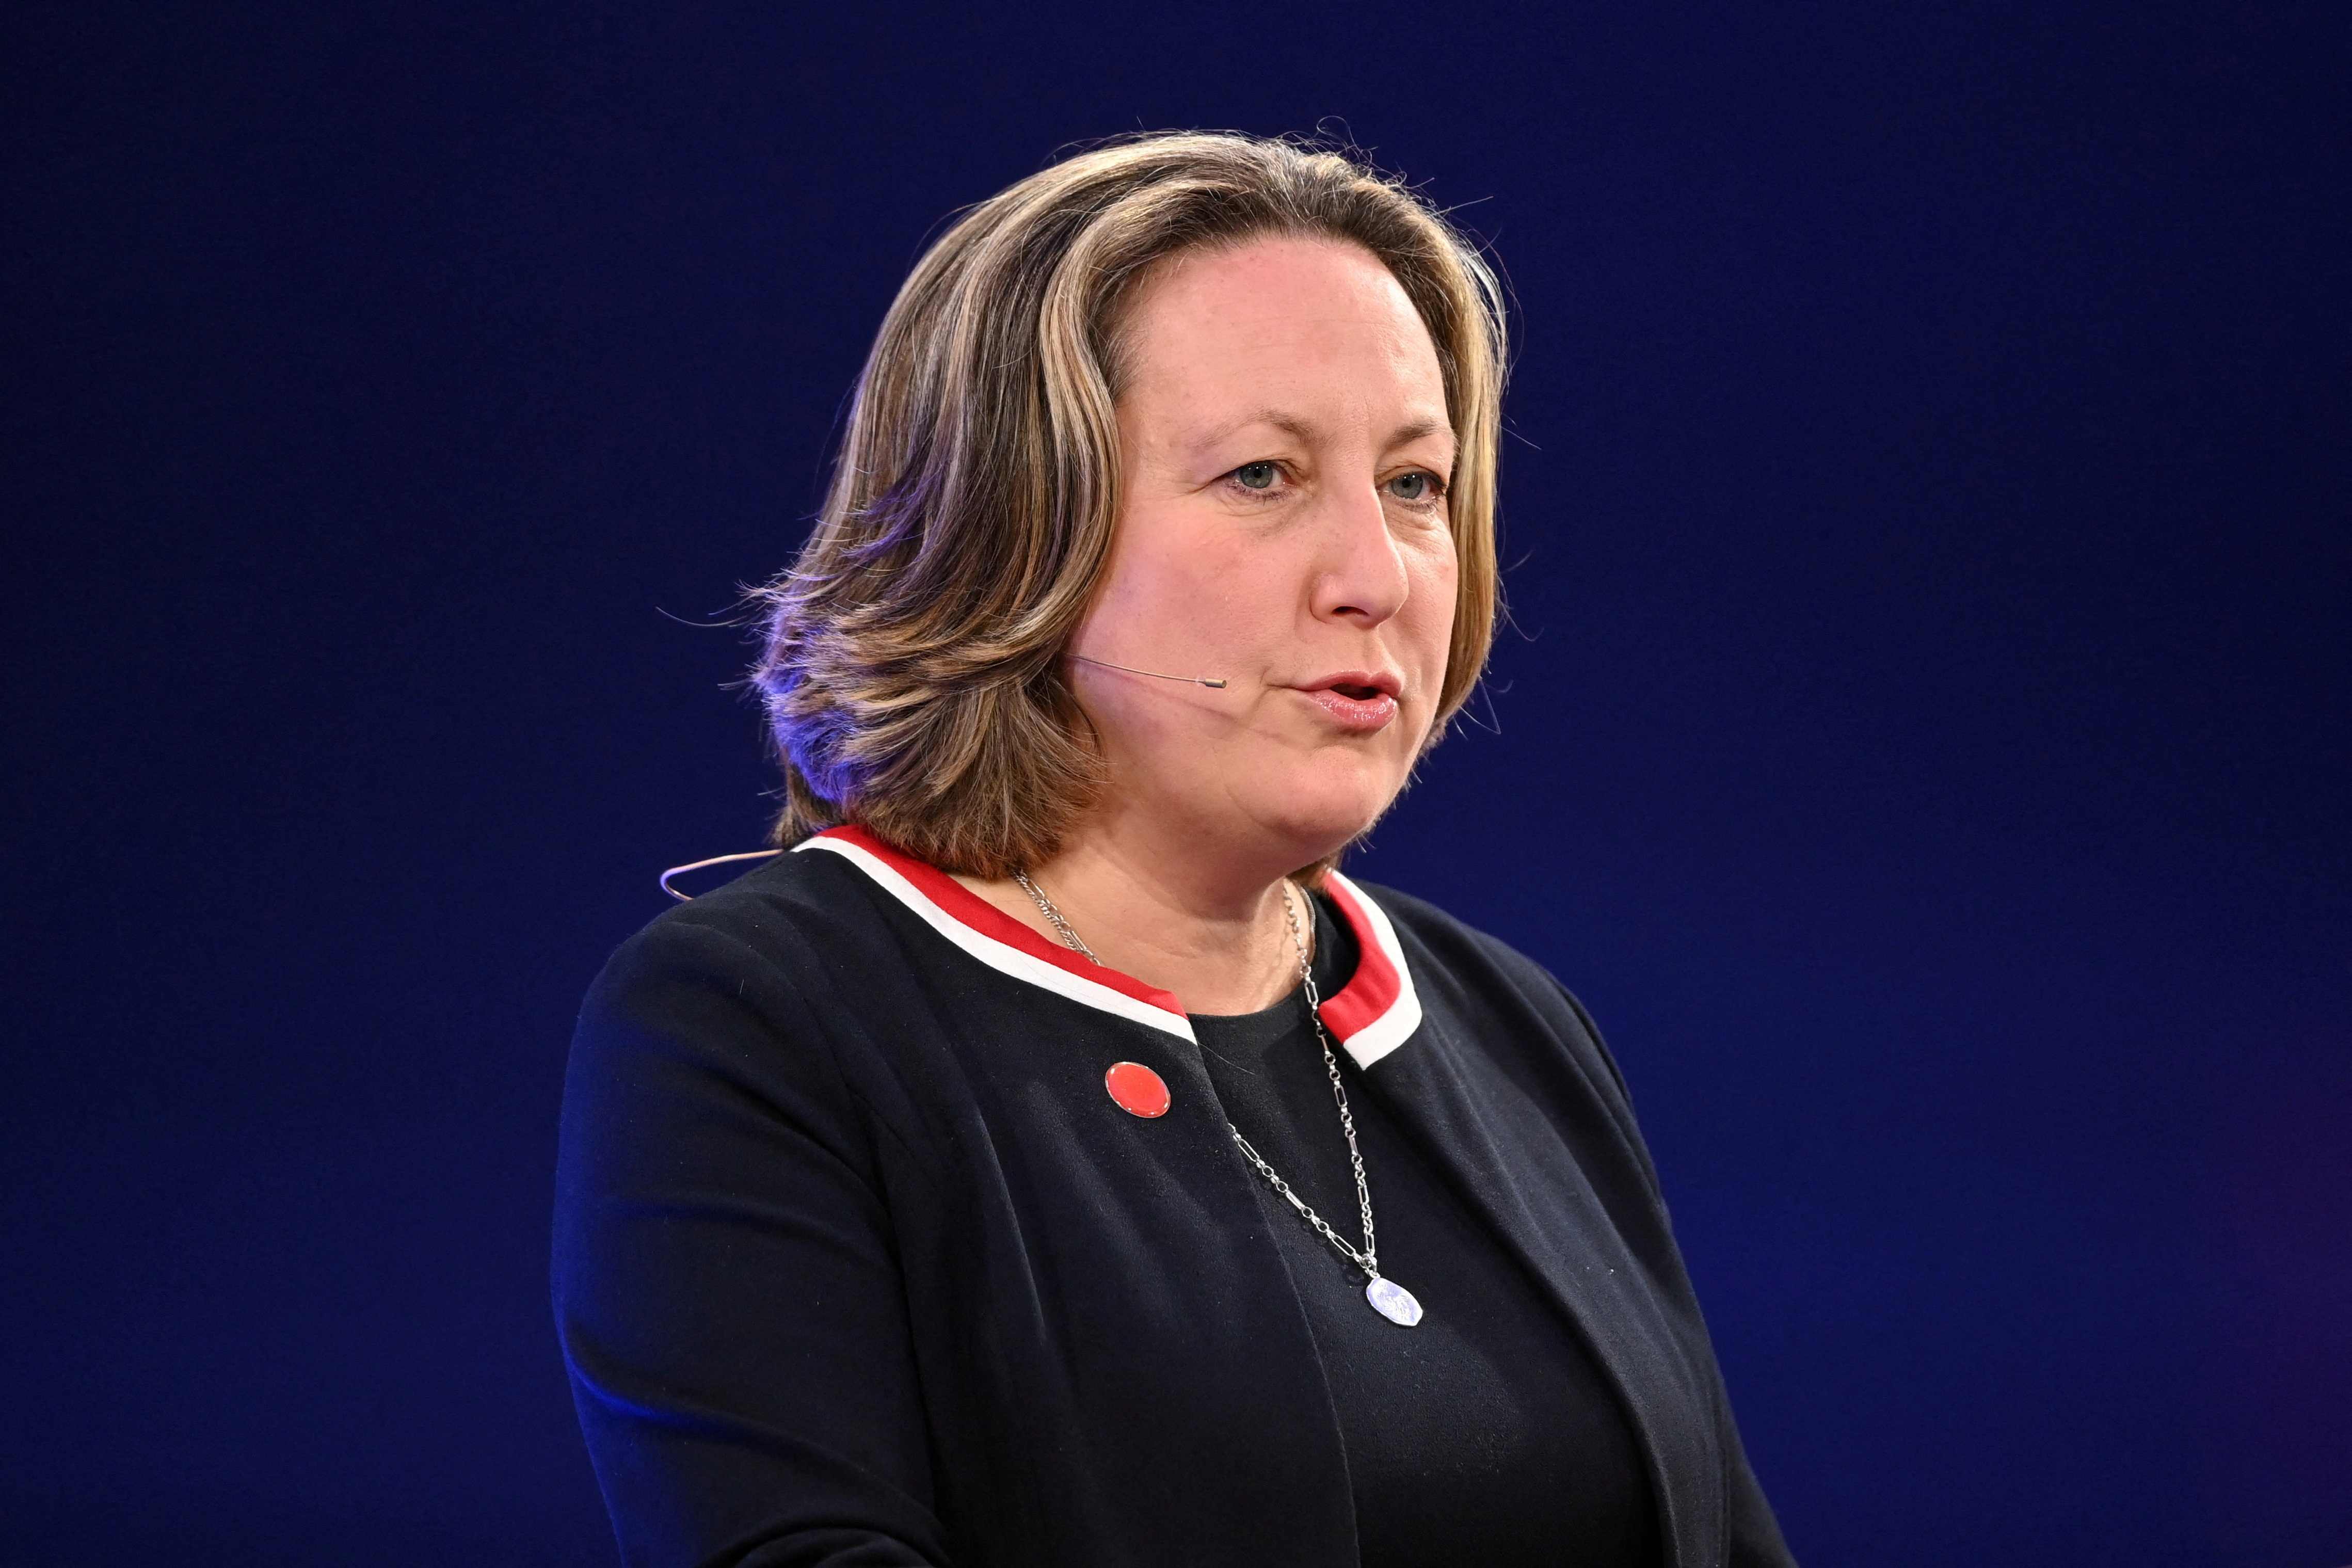 Britain's International Trade Secretary Anne-Marie Trevelyan speaks during the Global Investment Summit at the Science Museum, in London